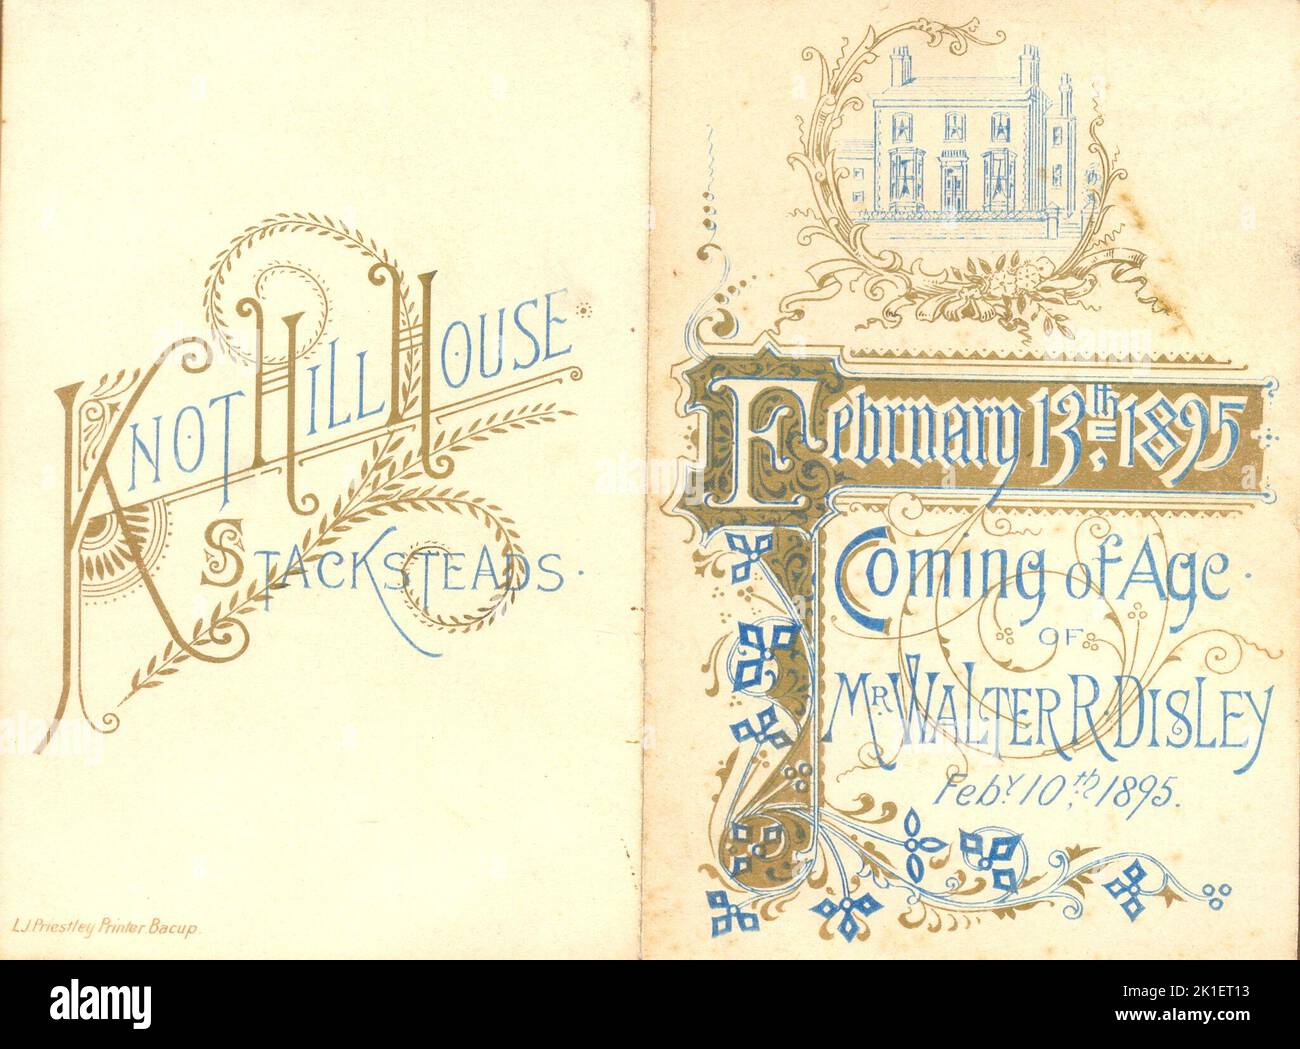 Chromolithographed menu card  to celebrate the Coming of Age of Mr Walter R Disley at Knot Hill House, Stacksteads [Bacup, Lancashire] 10 February 1895 Stock Photo